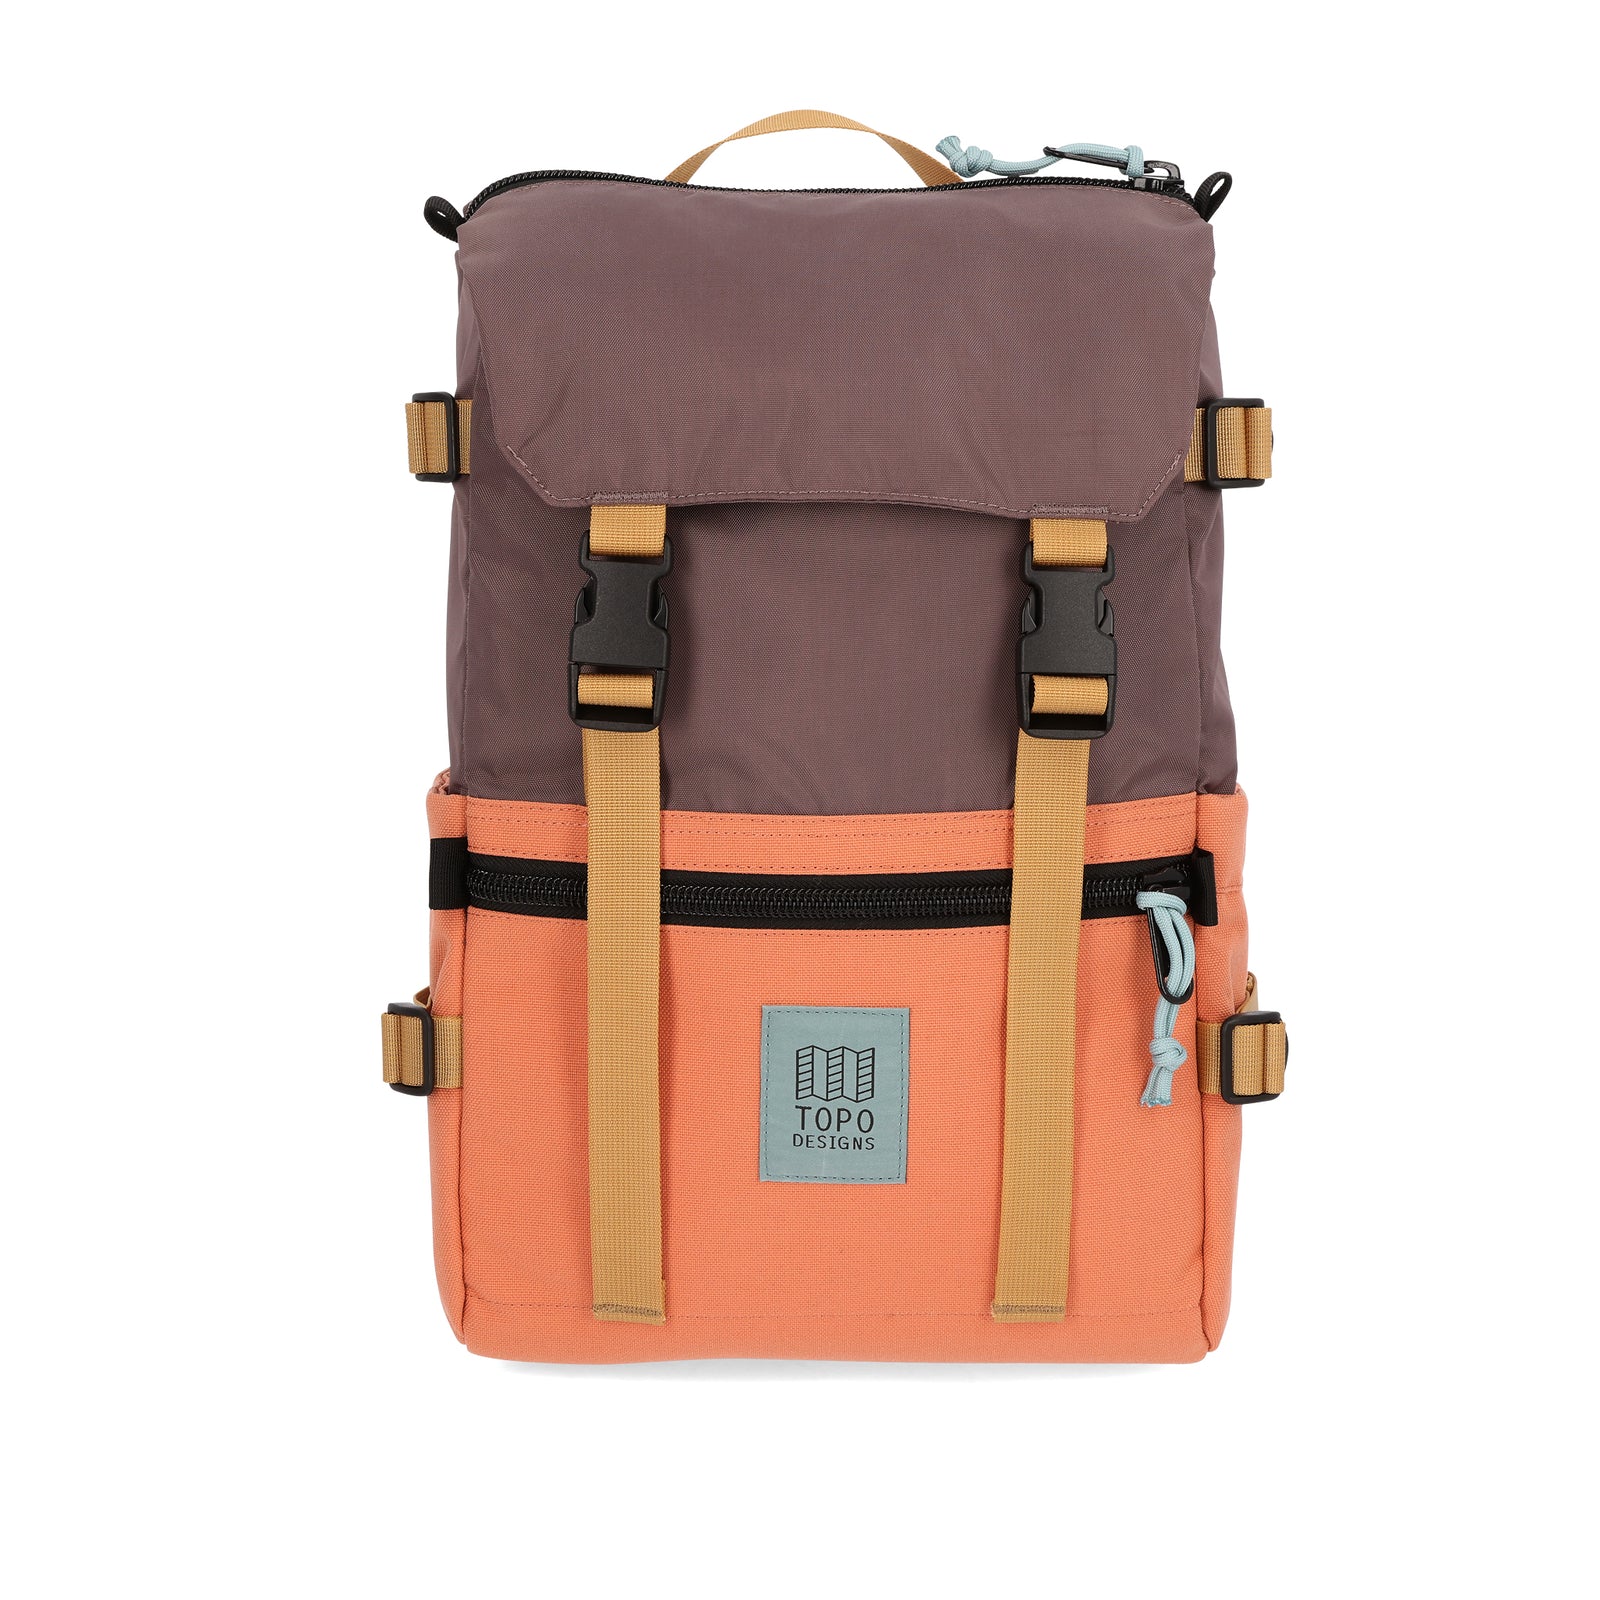 Topo Designs Rover Pack Classic laptop backpack in "Coral / Peppercorn".